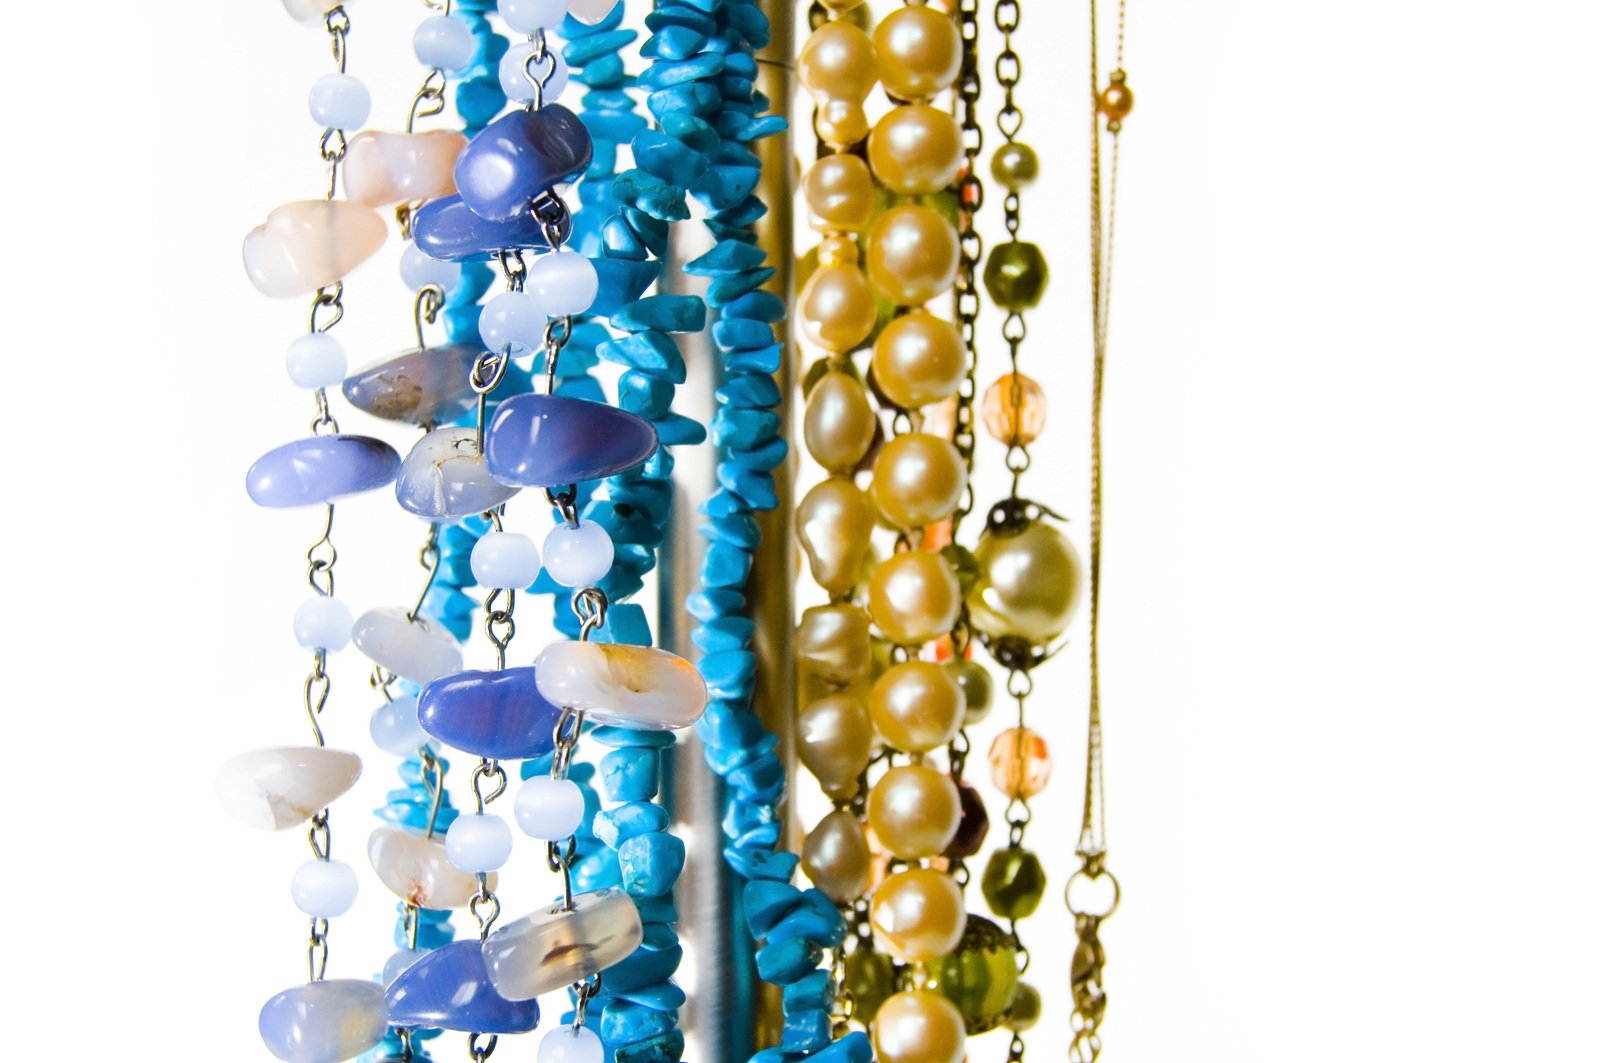 several chains of beads with multiple colors hanging on a wall